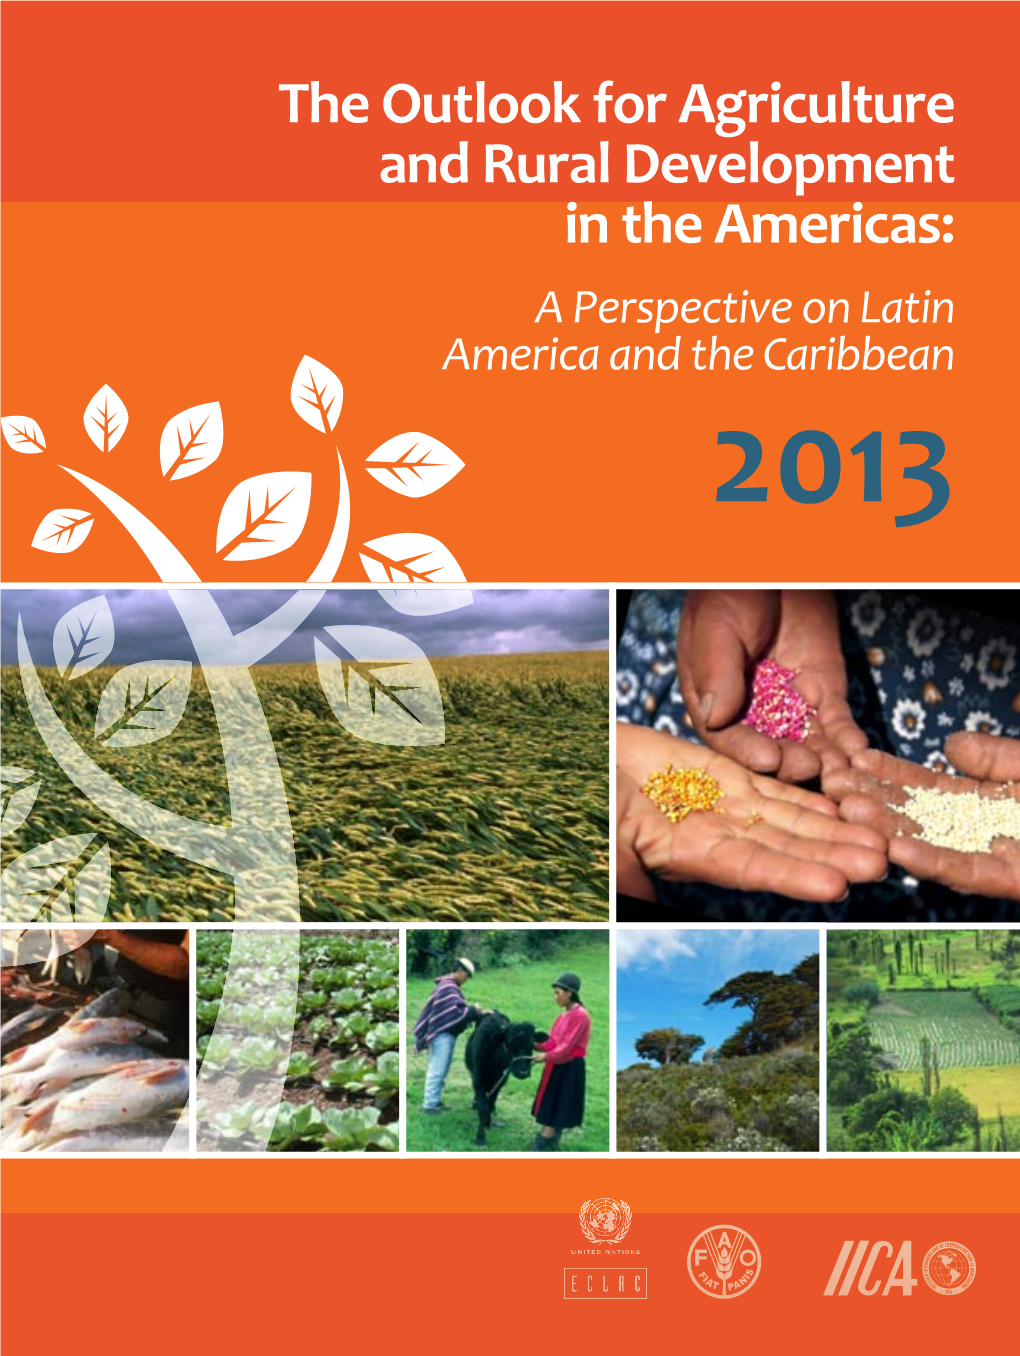 The Outlook for Agriculture and Rural Development in the Americas: a Perspective on Latin America and the Caribbean 2013